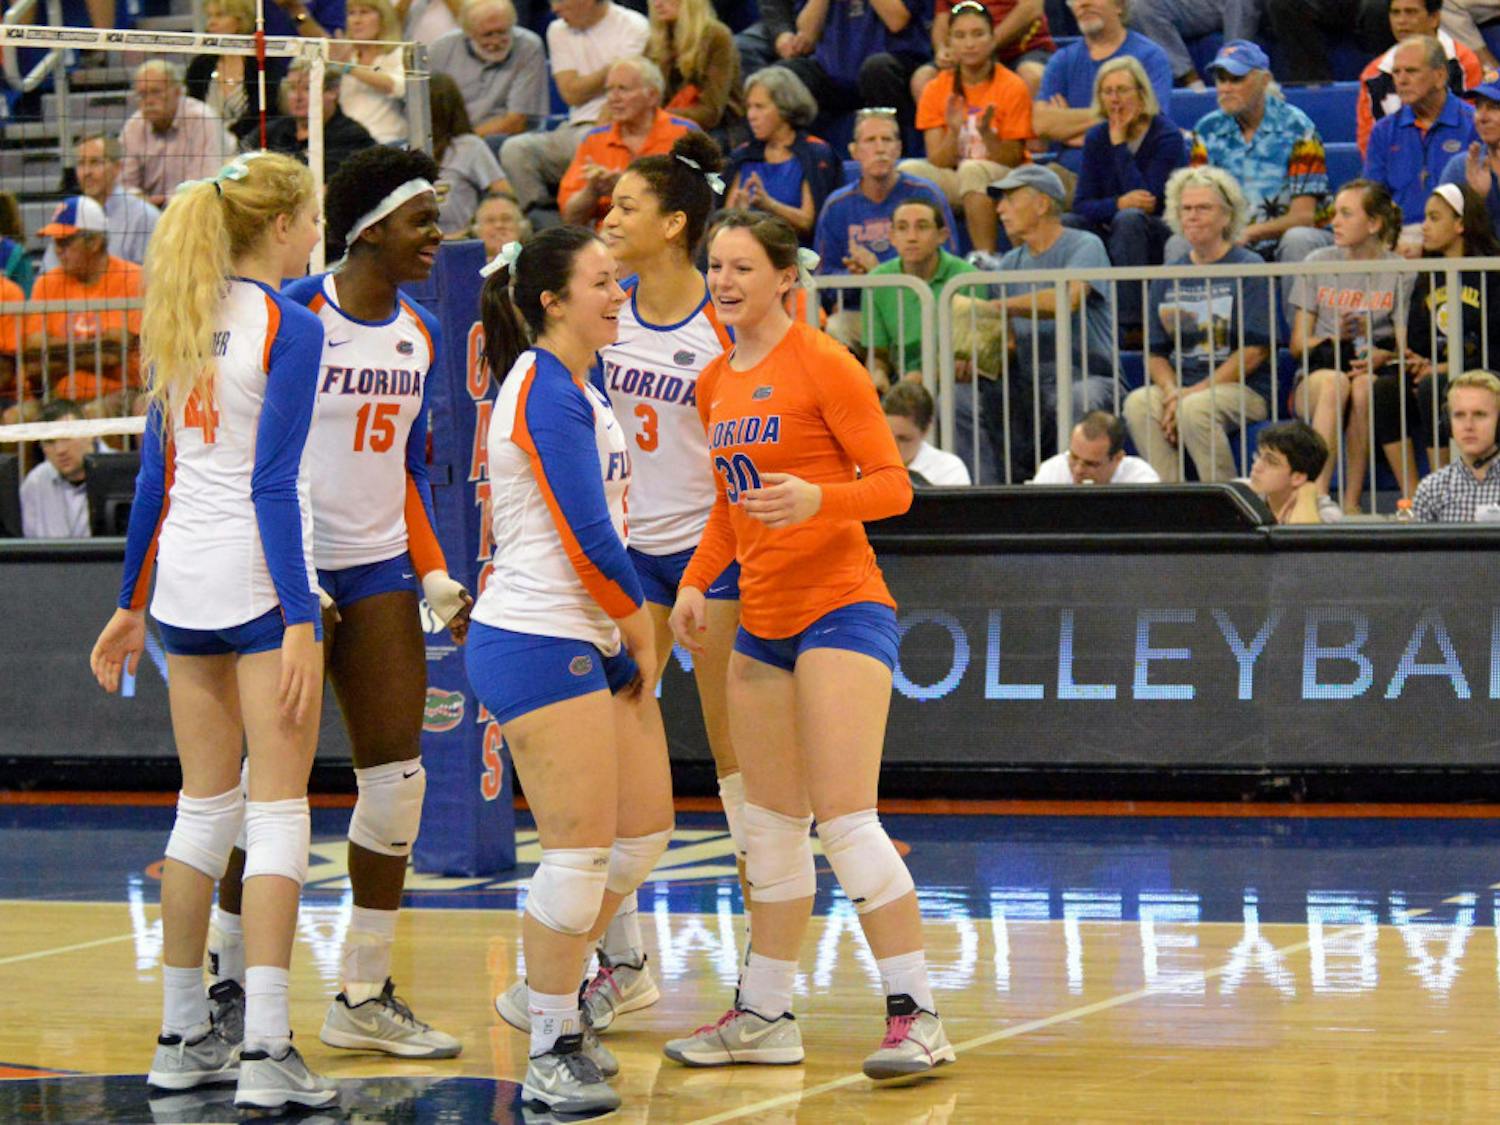 UF players celebrate during Florida's 3-0 win against Alabama State in the first round of the NCAA Tournament in the O'Connell Center.